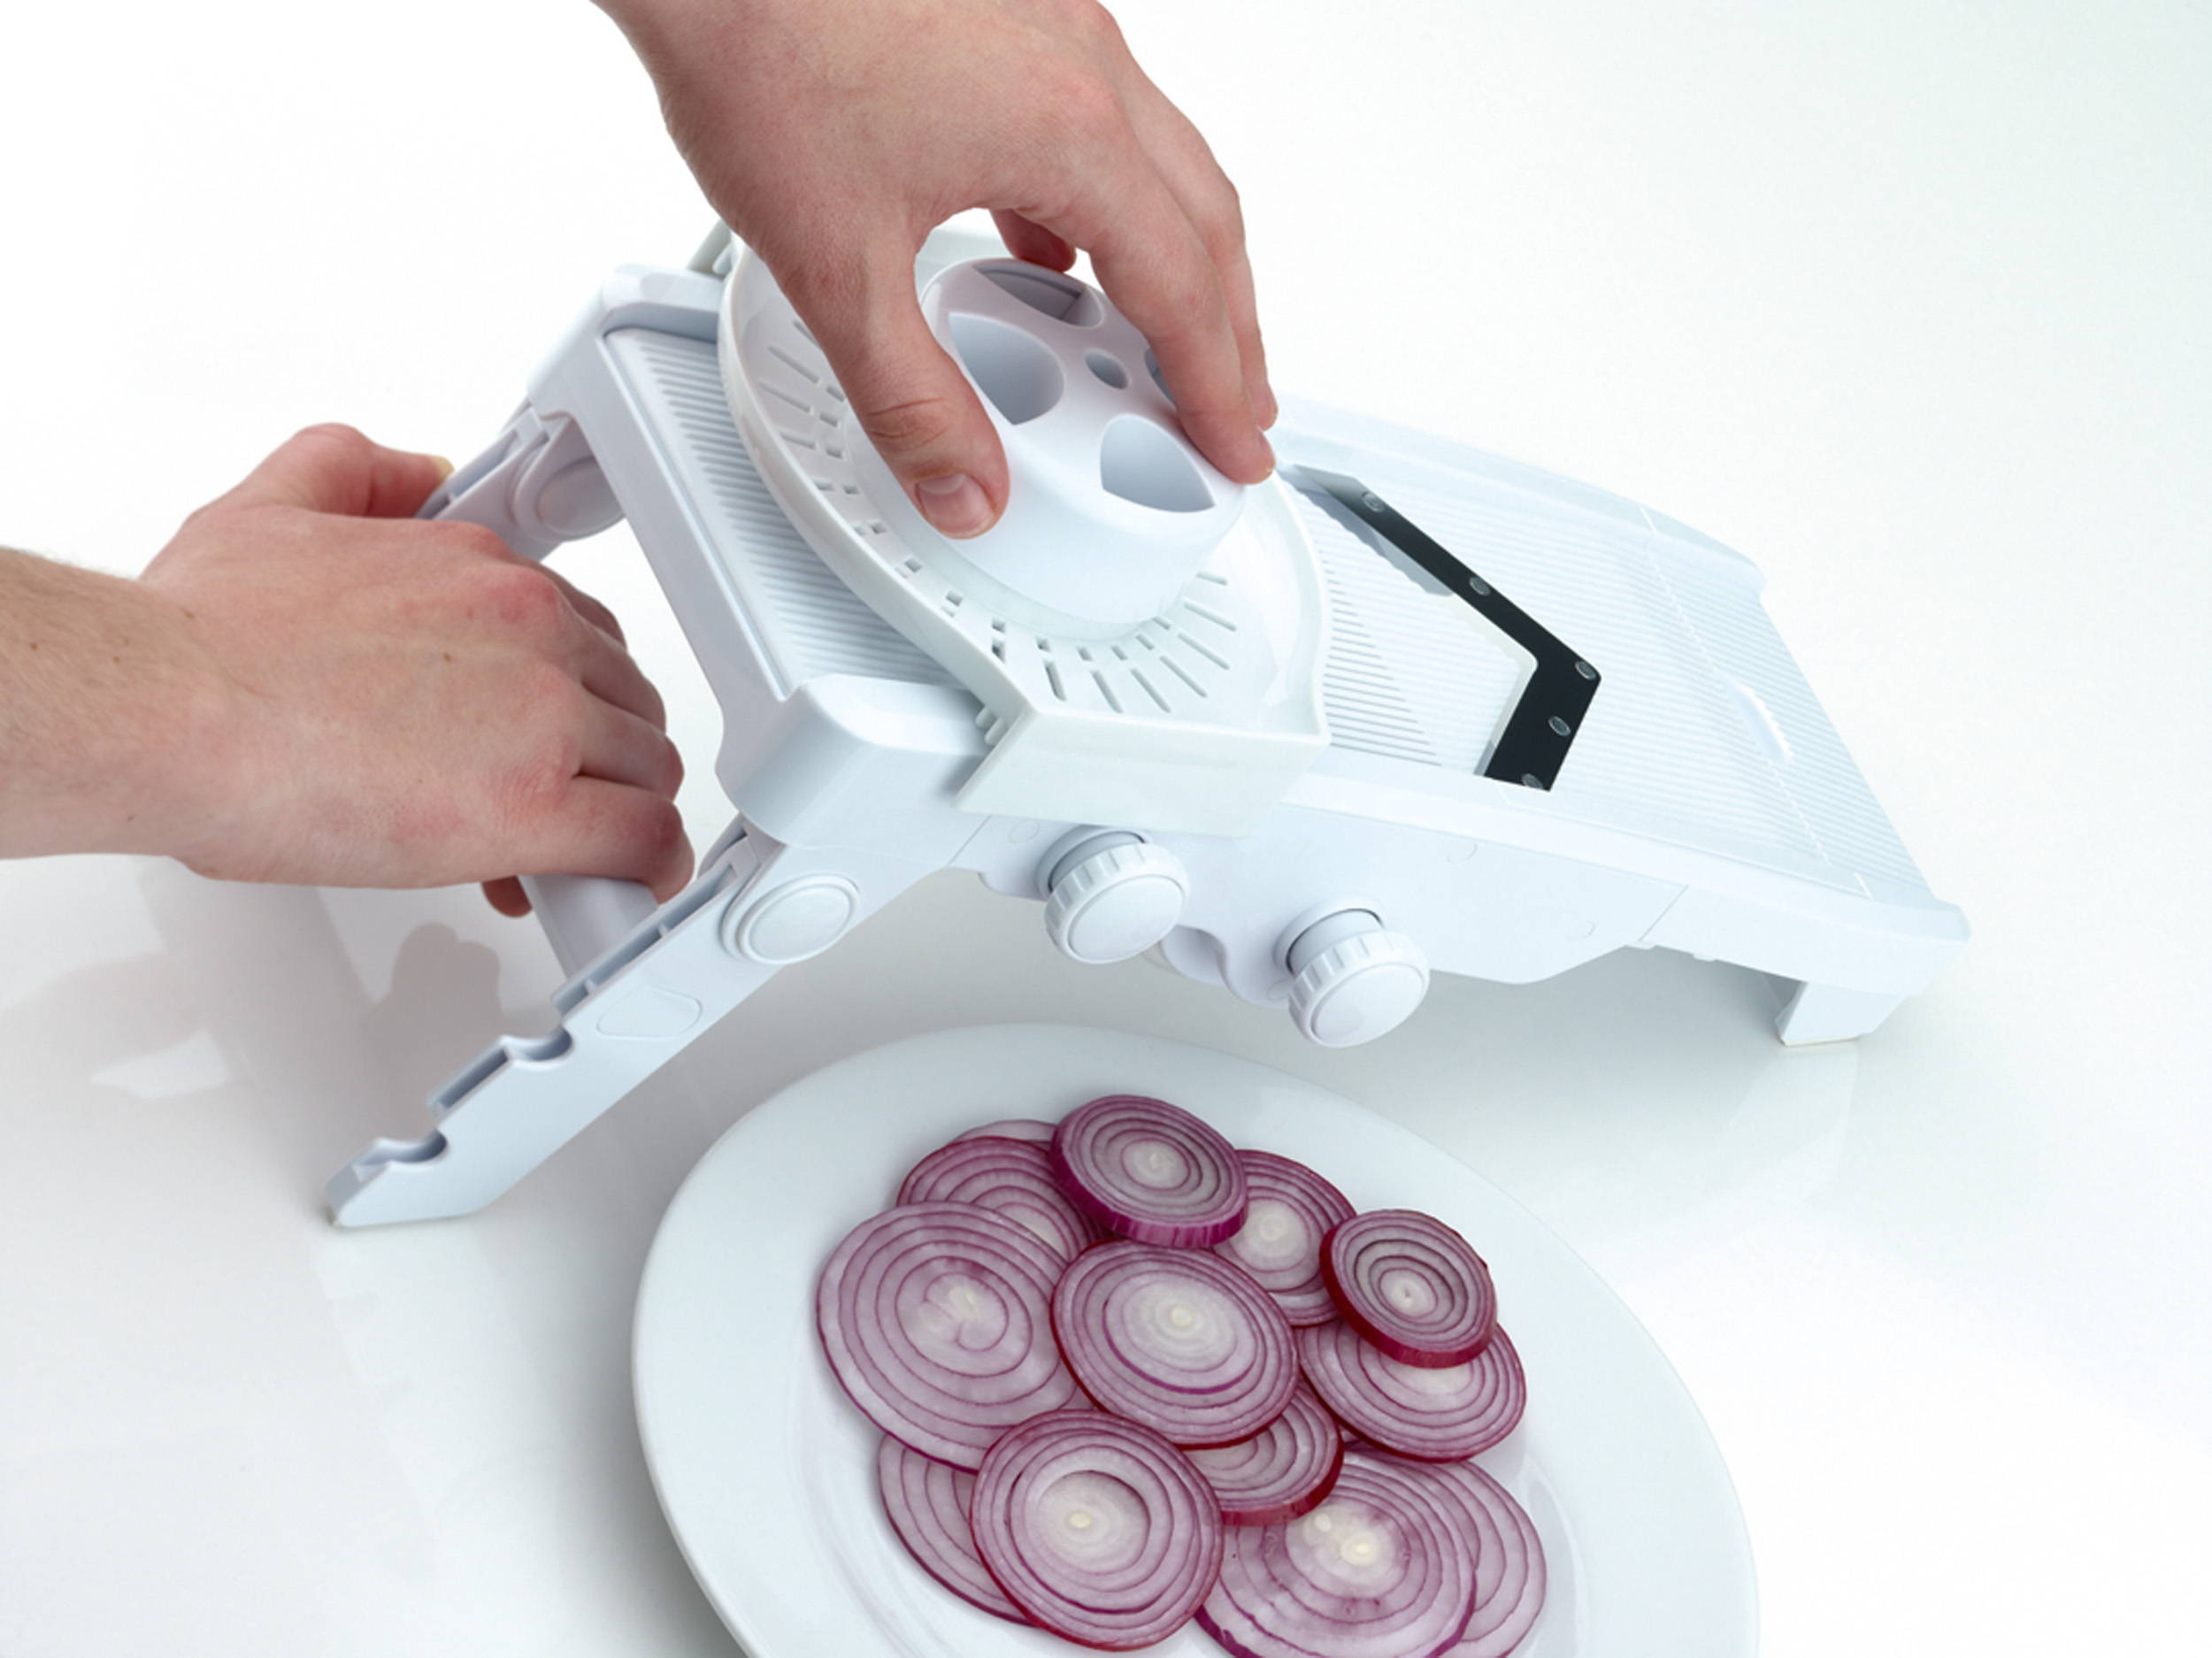 KitchenCraft 'V' Shaped Super Slicer with Five Blades and Storage Box